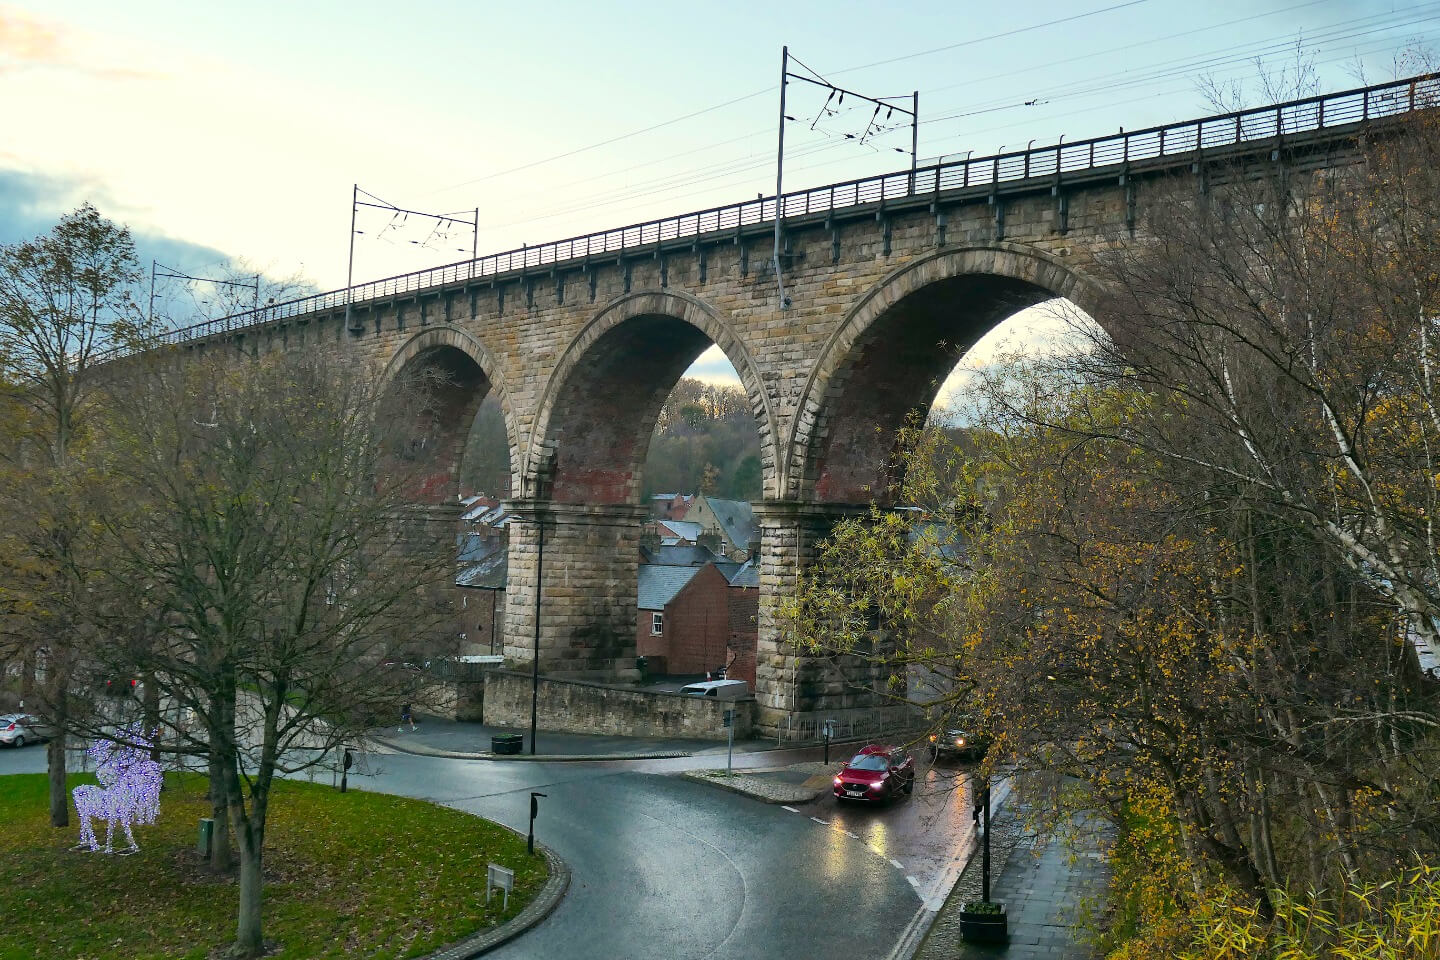 Student Accommodation in Viaduct, Durham - the Durham Viaduct